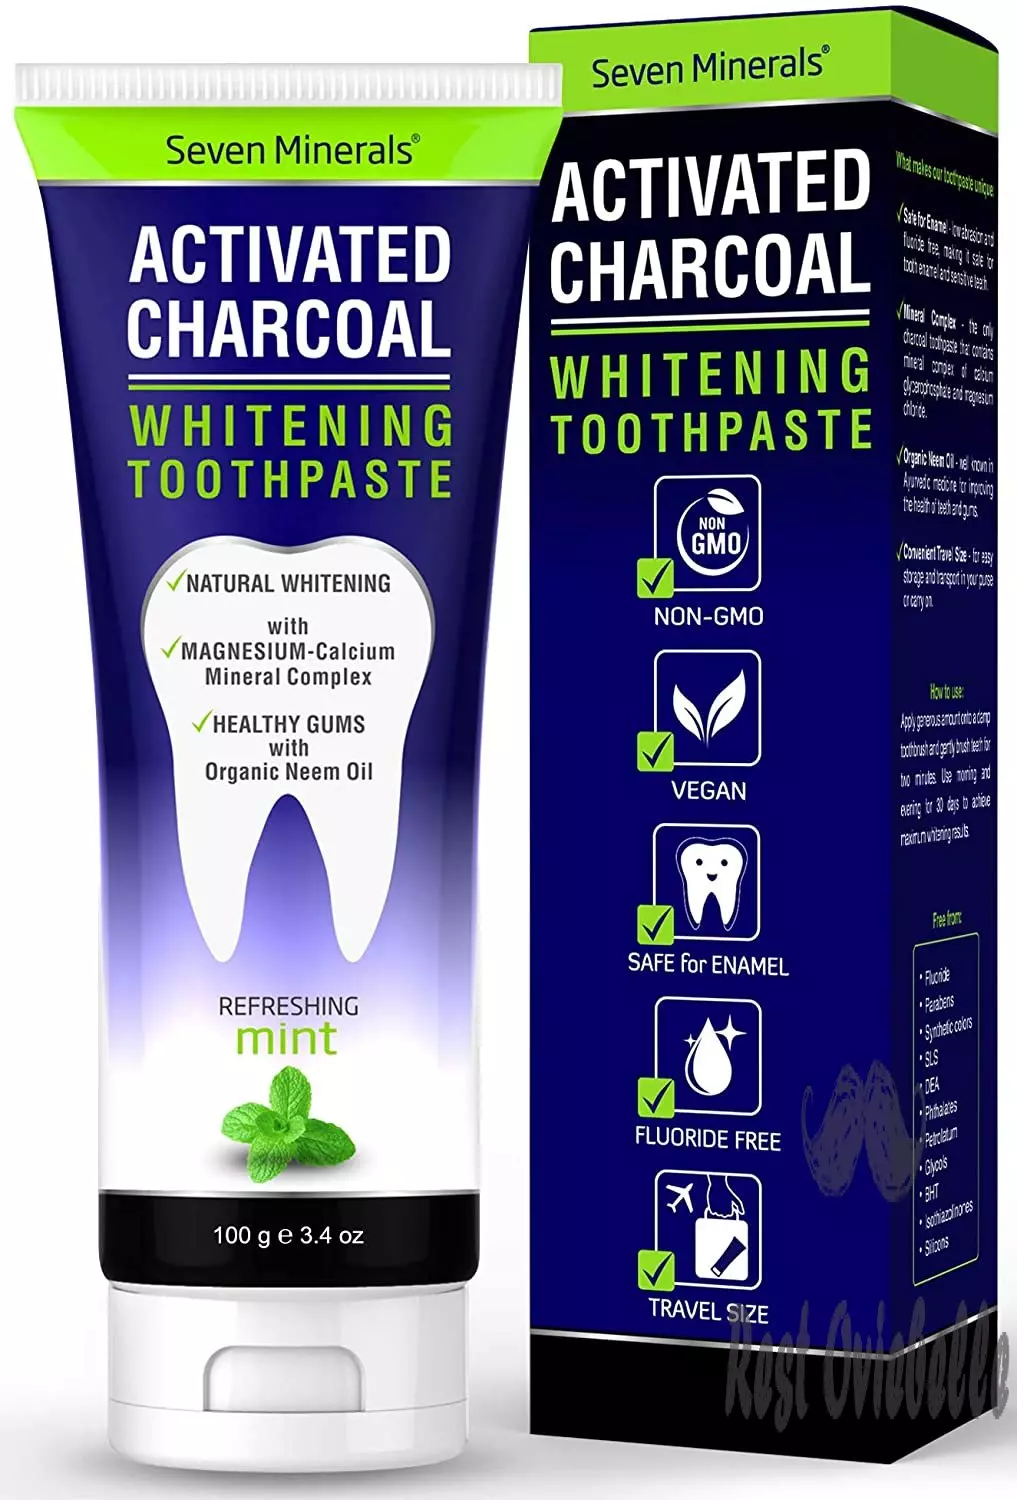 Seven Minerals Activated Charcoal Whitening Toothpaste